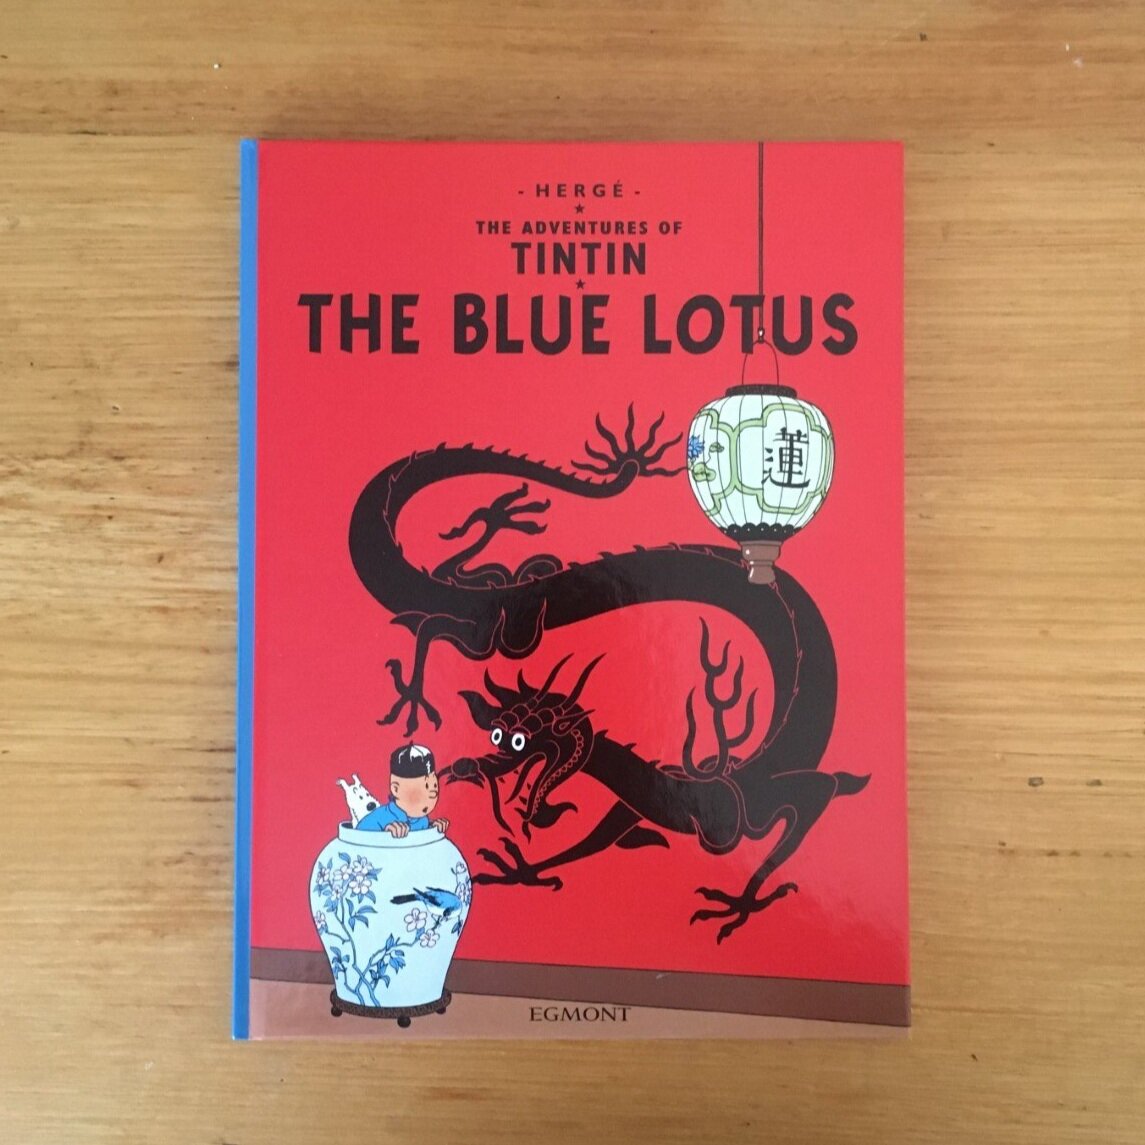  Originally titled ‘Tintin in the Orient’ when serialized, ‘The Blue Lotus’ follows on directly from ‘Cigars of the Pharaoh’. 